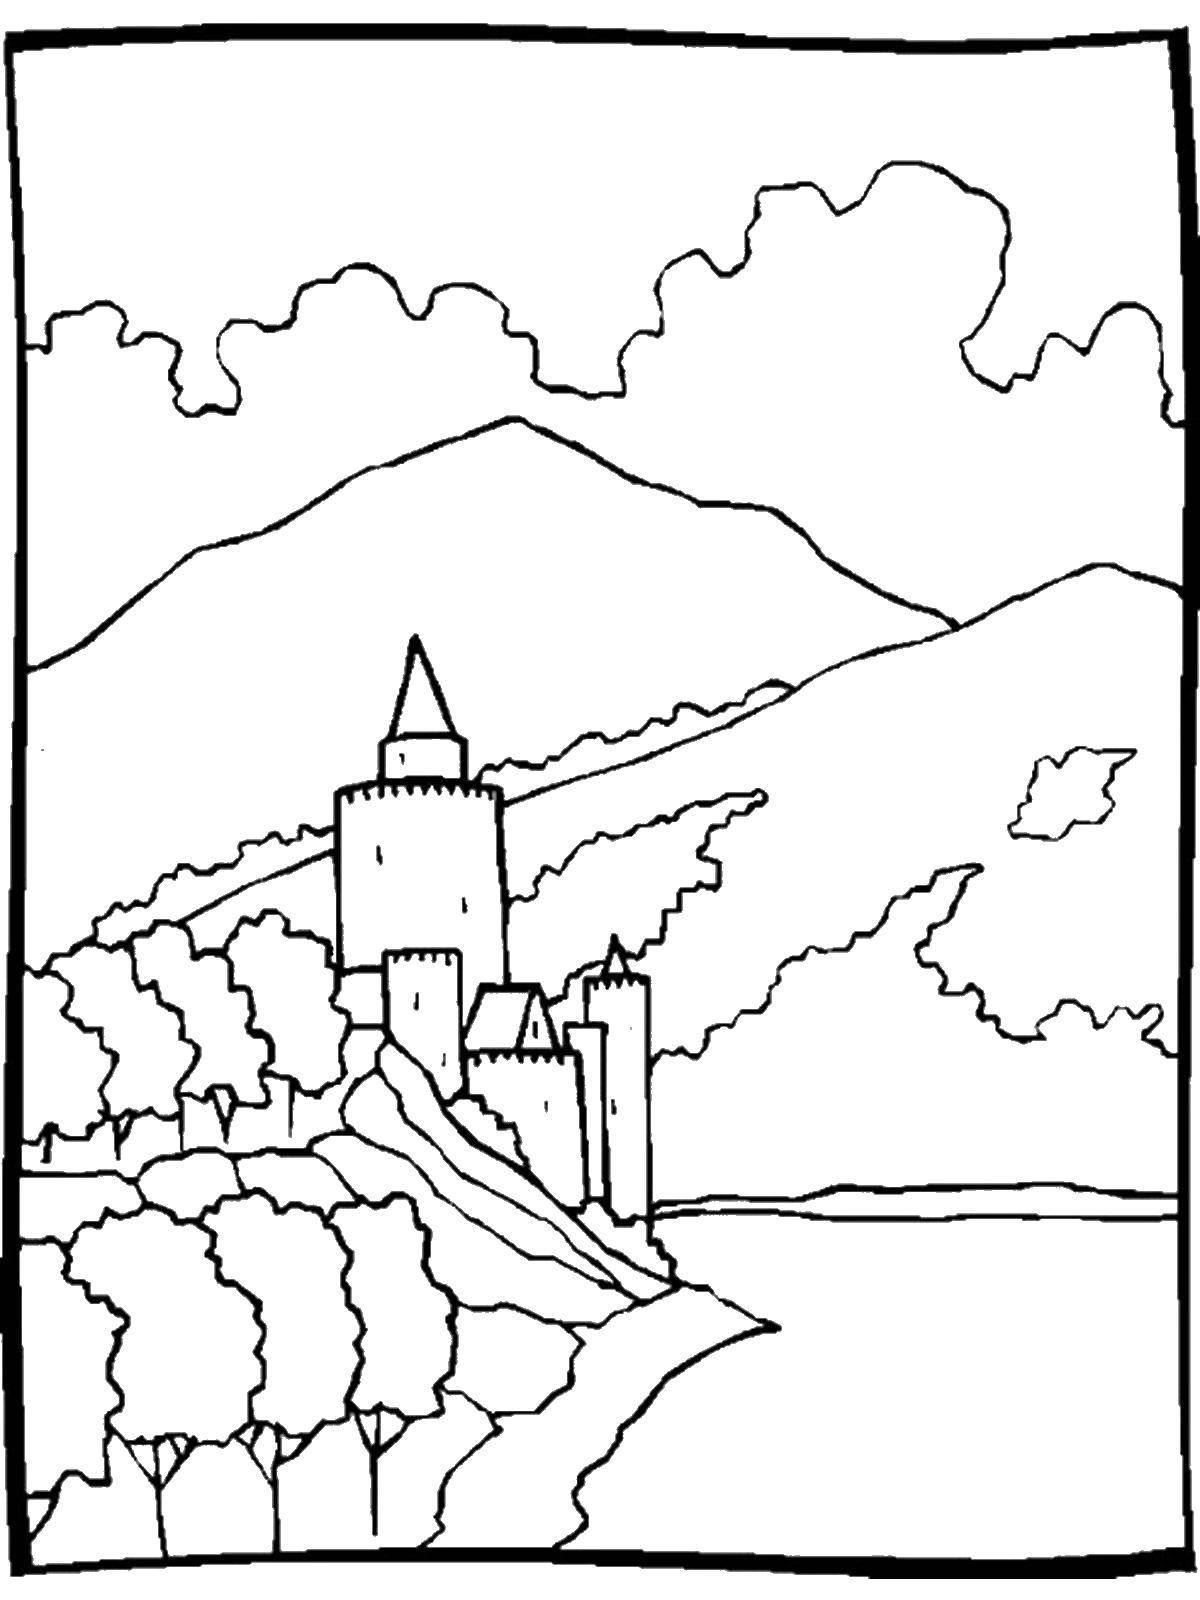 Coloring Castle on the edge of the river. Category Nature. Tags:  Nature, forest, mountains, river, castle.